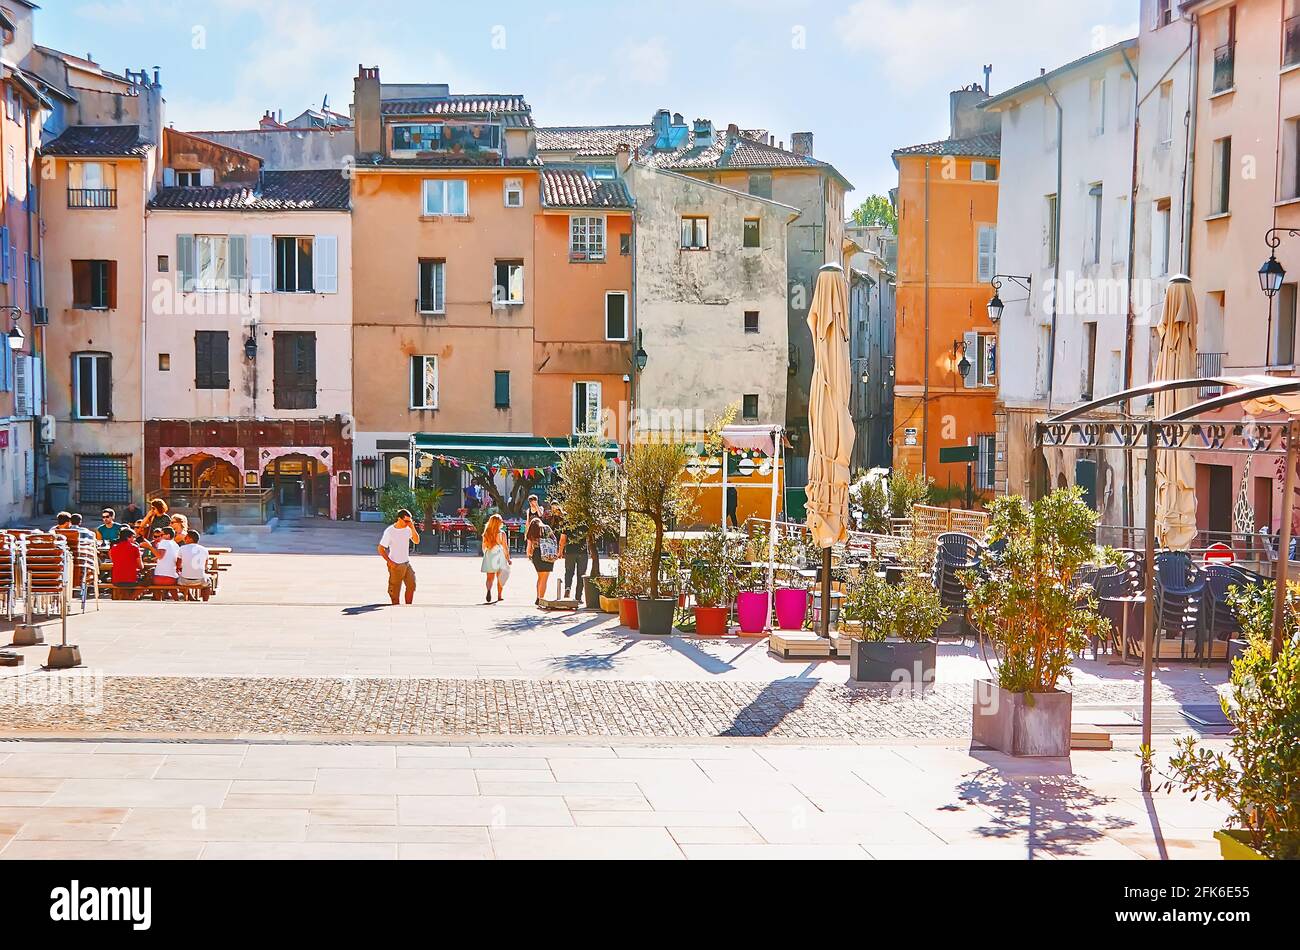 AIX-EN-PROVENCE, FRANCE- MAY 6, 2013: The old dense housing in Forum des Cardeurs Square with cozy bars, cafes and outdoor restaurants, on May 6 in Ai Stock Photo